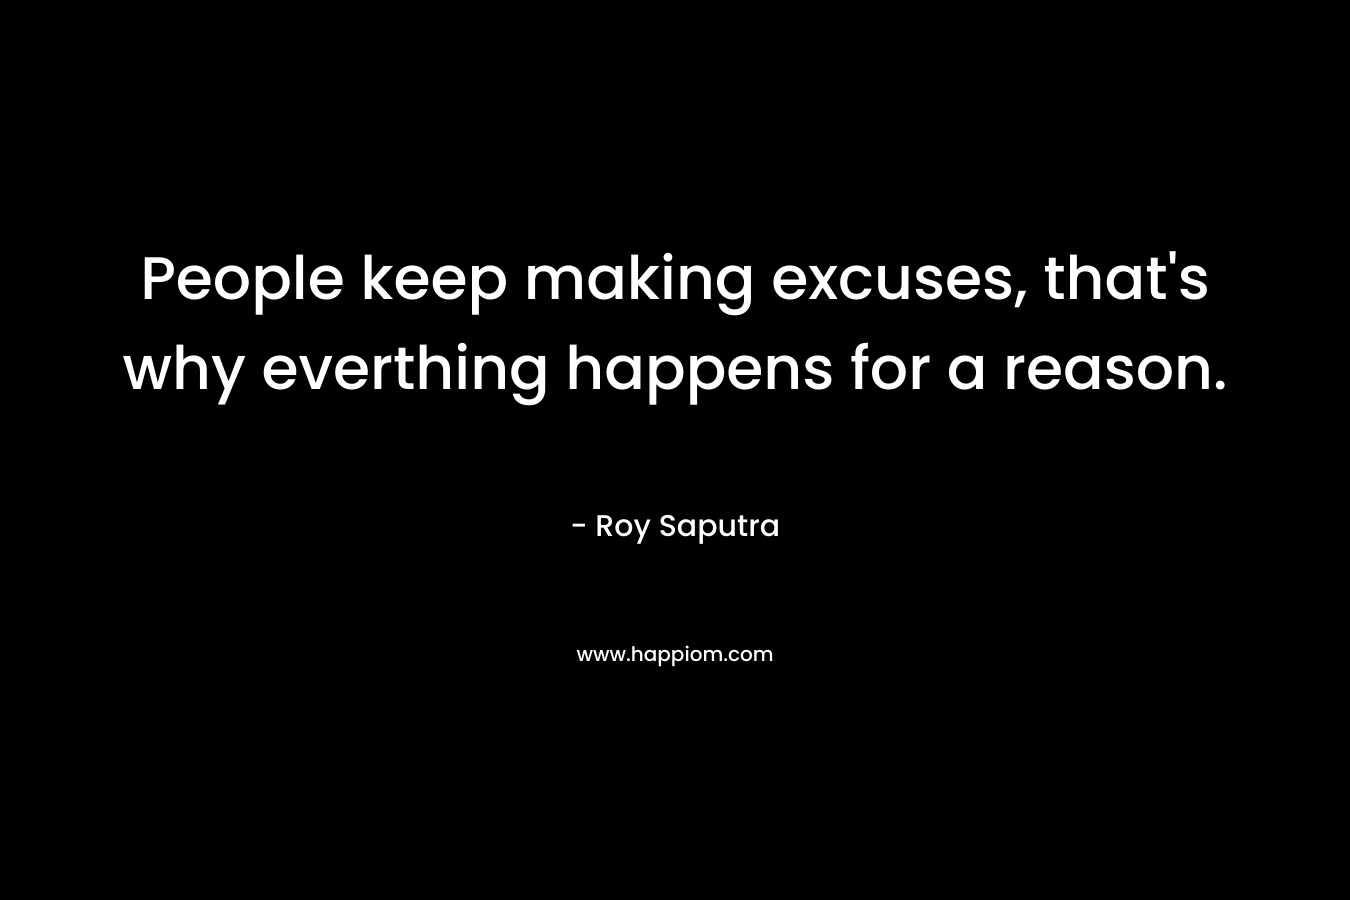 People keep making excuses, that's why everthing happens for a reason.